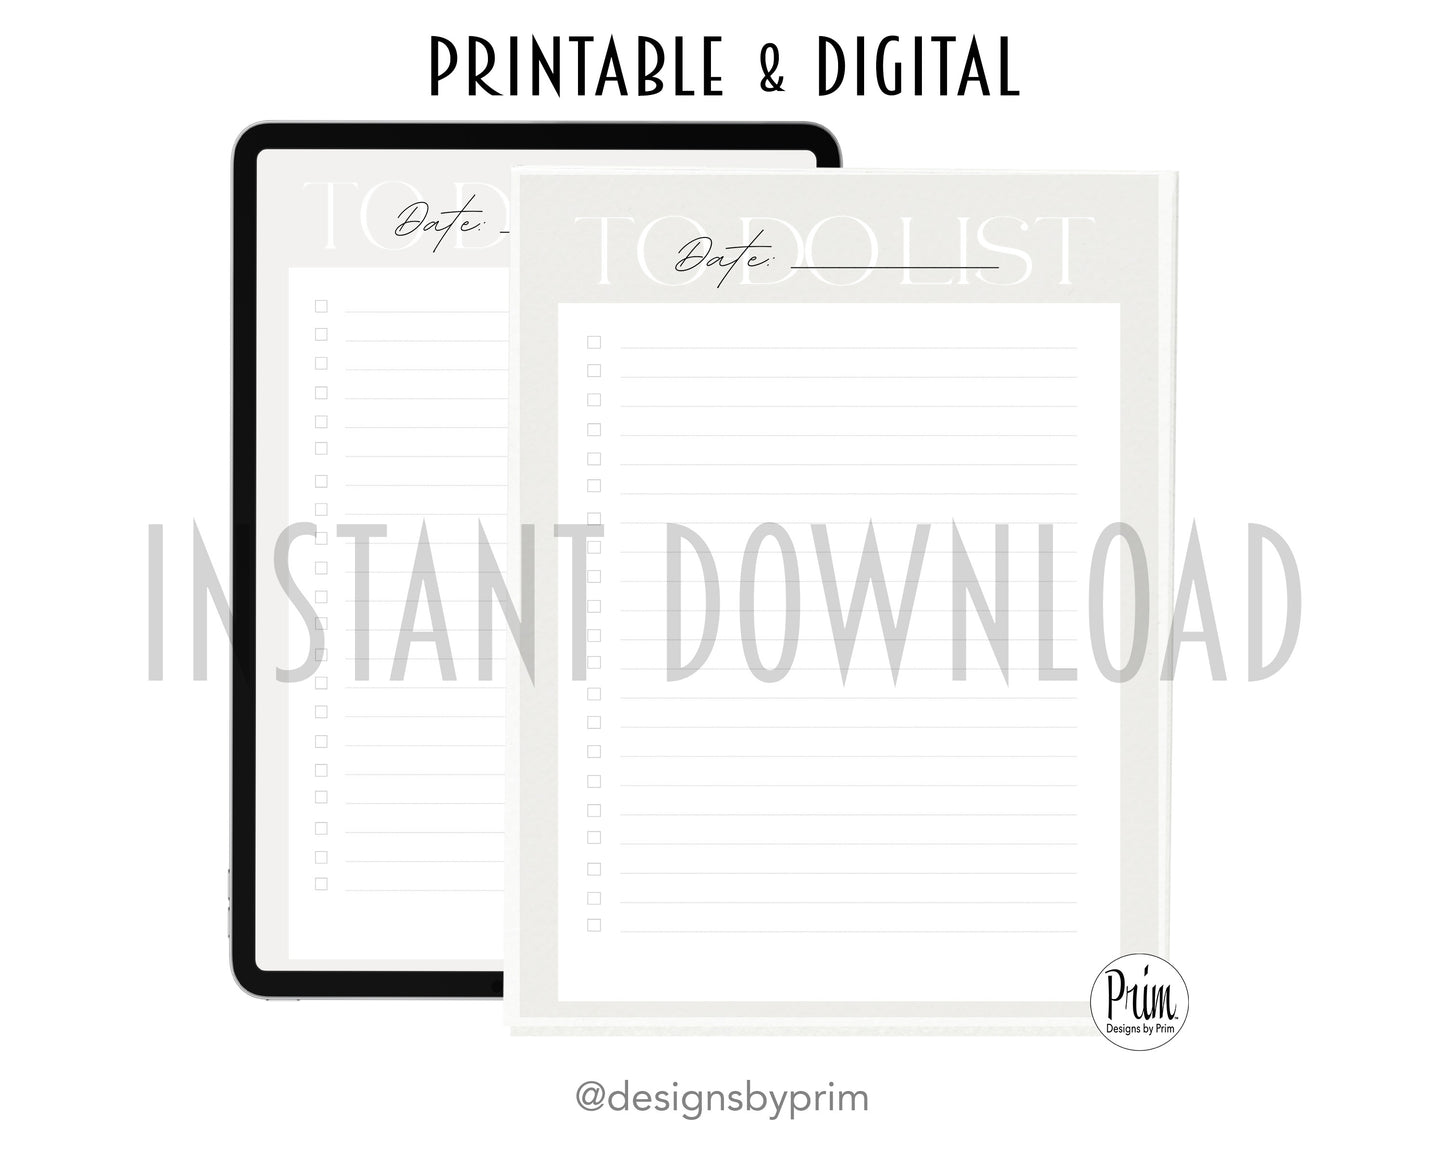 Designs by Prim To-Do List Digital Printable Planner Beige | Daily Planner Productivity Tool Task Management Time Manager Checklist Organizer Personal Task